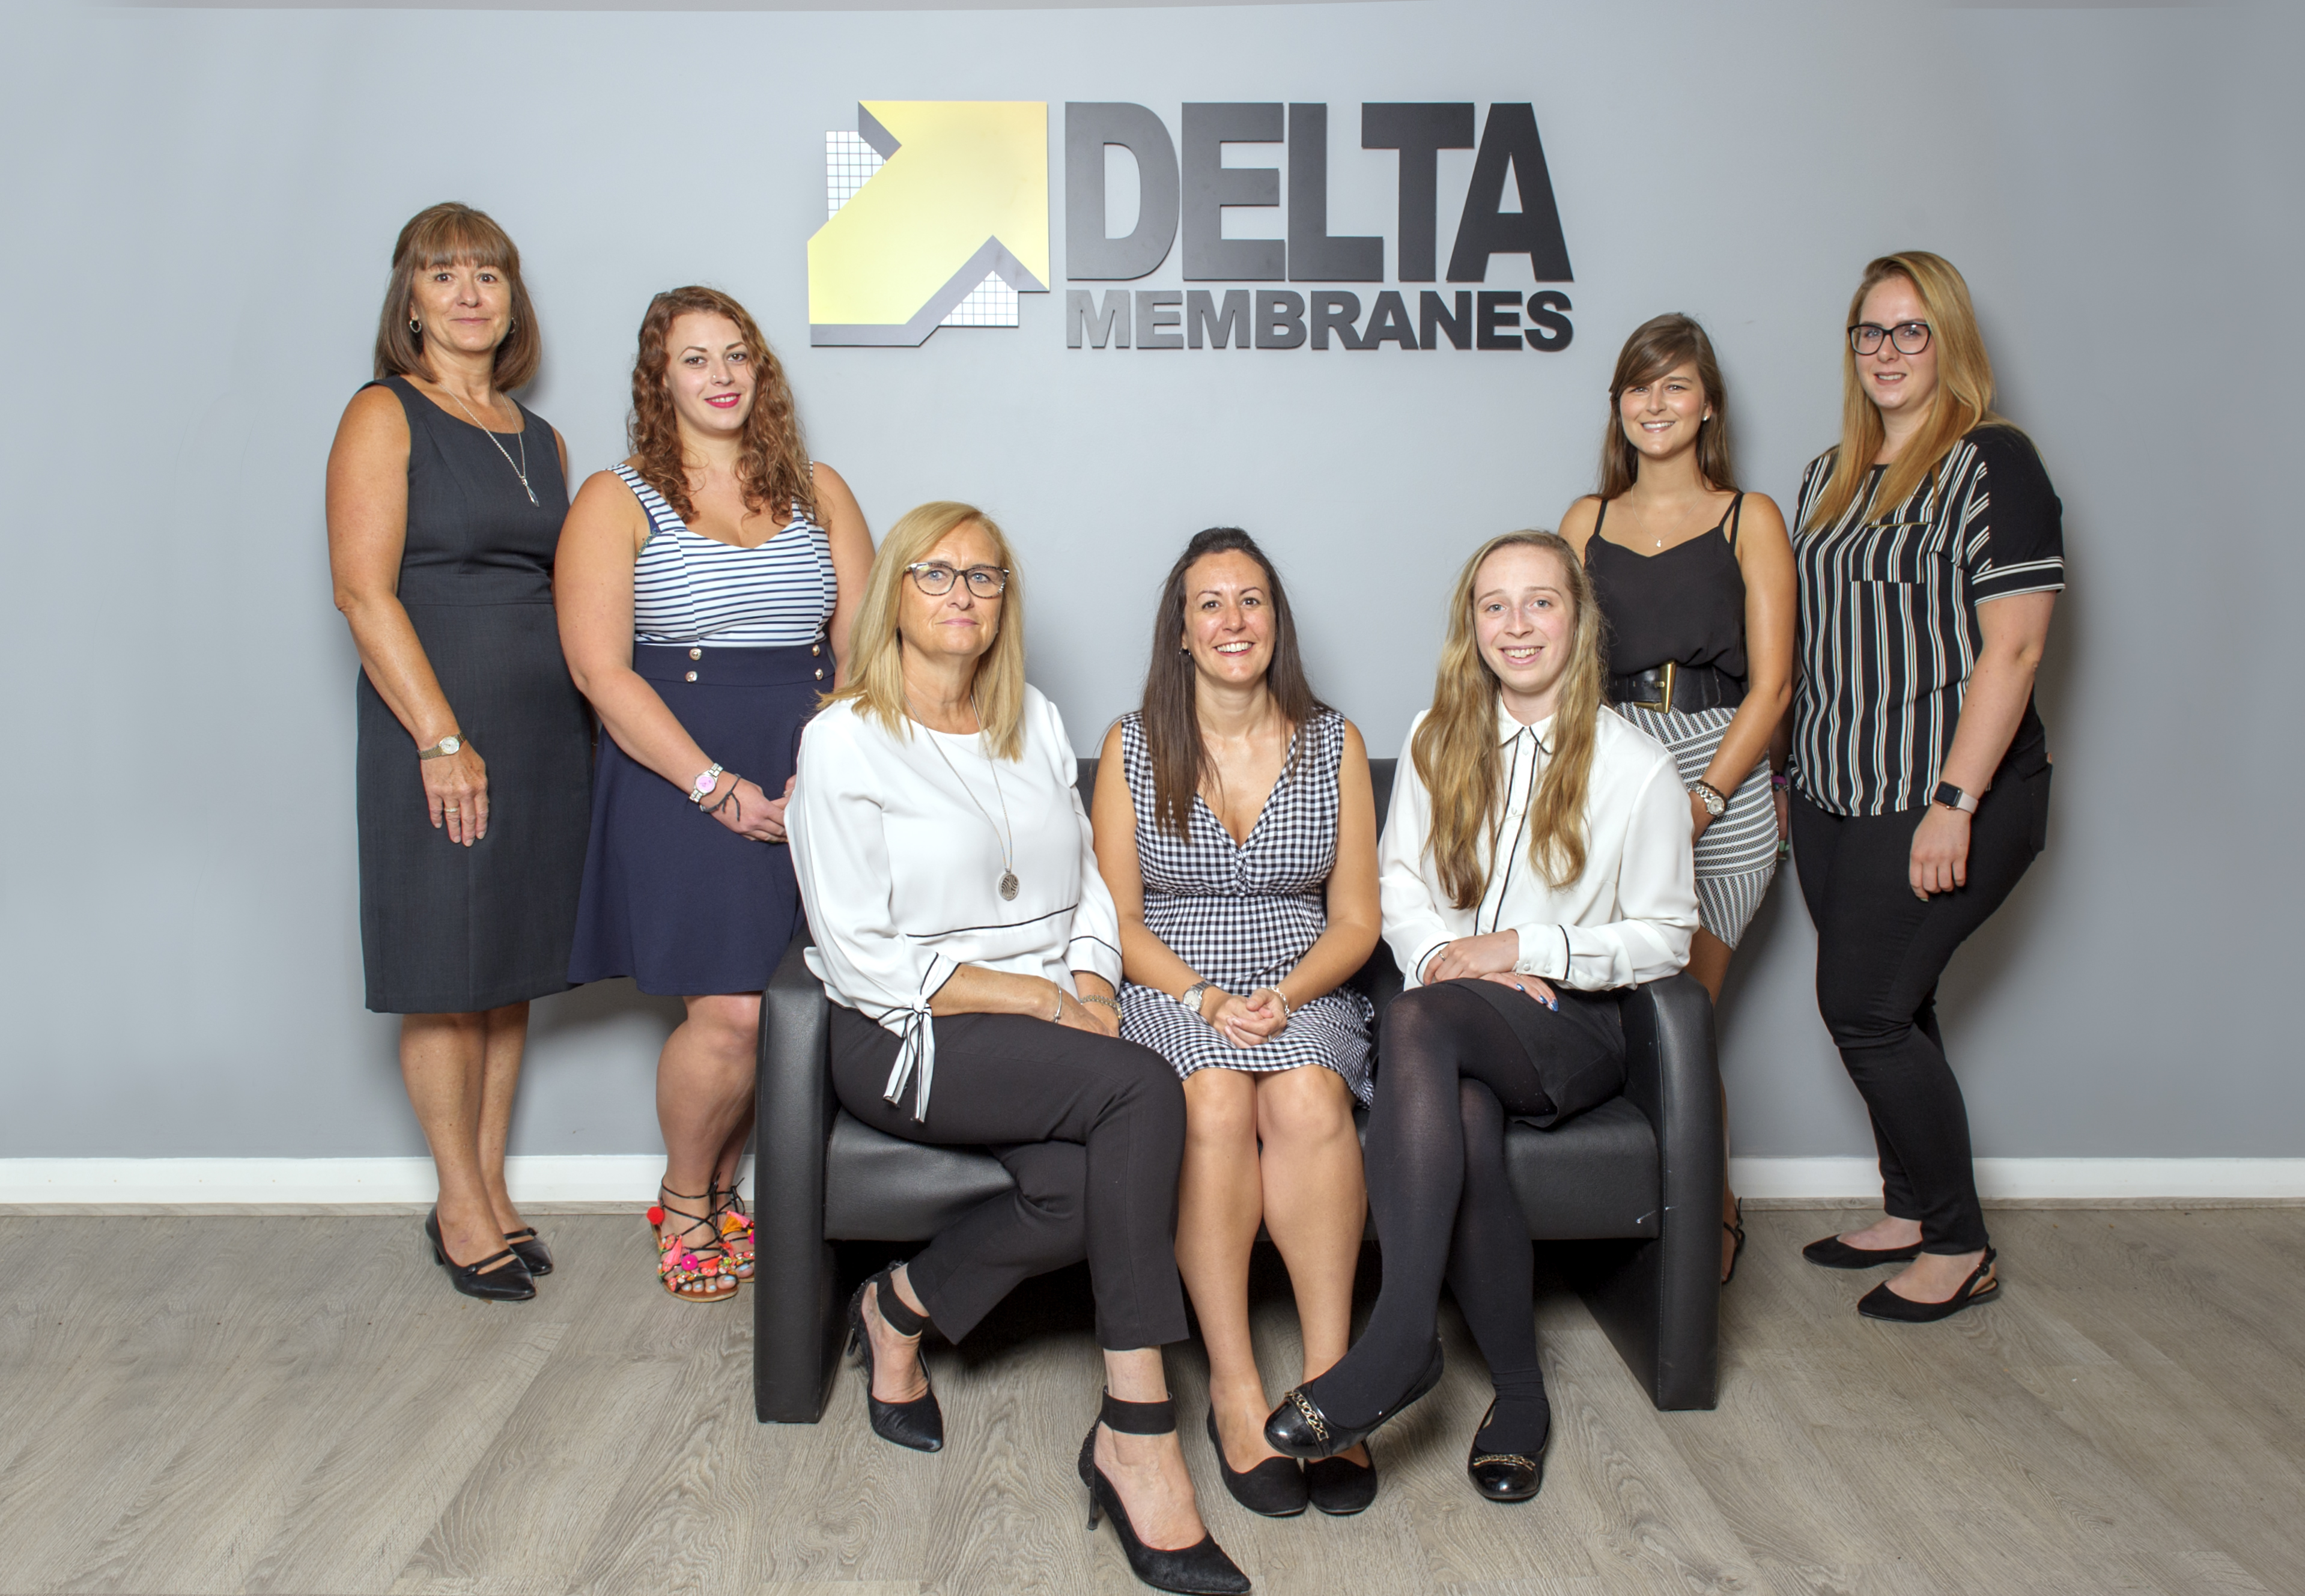 Delta shortlisted for two categories within the London Construction Awards 2019 #TeamDelta @DeltaMembranes